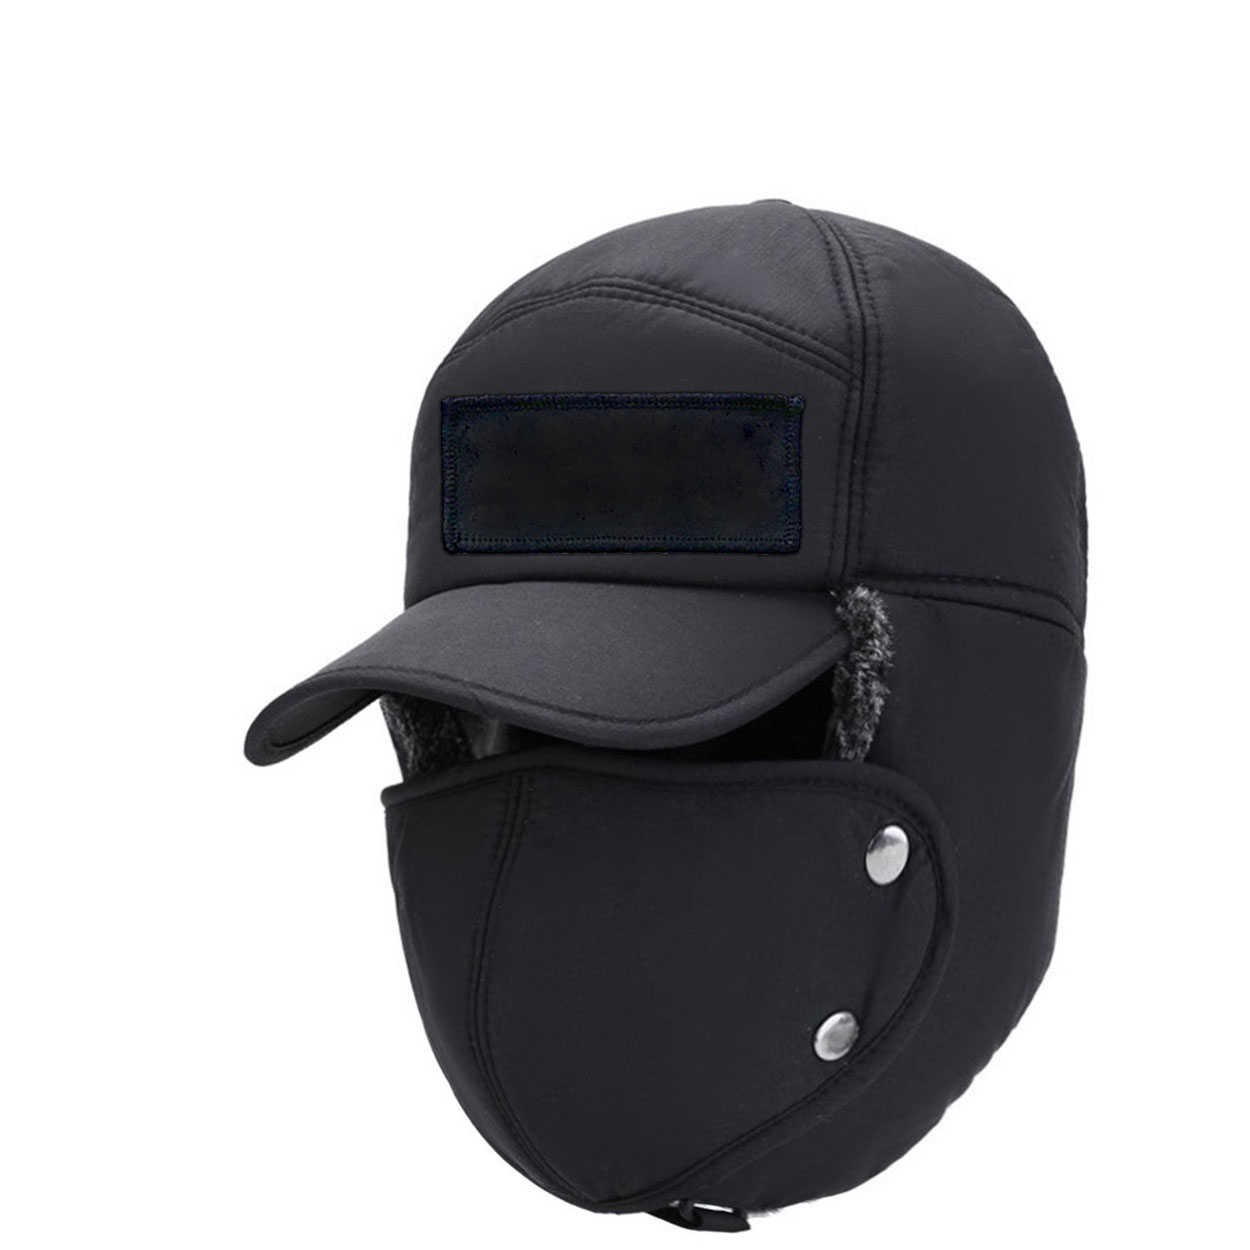 Product Details: Classic Woven Patch Full Face Windproof Bomber Hat Black (SPRING PARK Winter Men Windproof Hat Warm Full Face Detachable Mask Outdoor Baseball Cap)